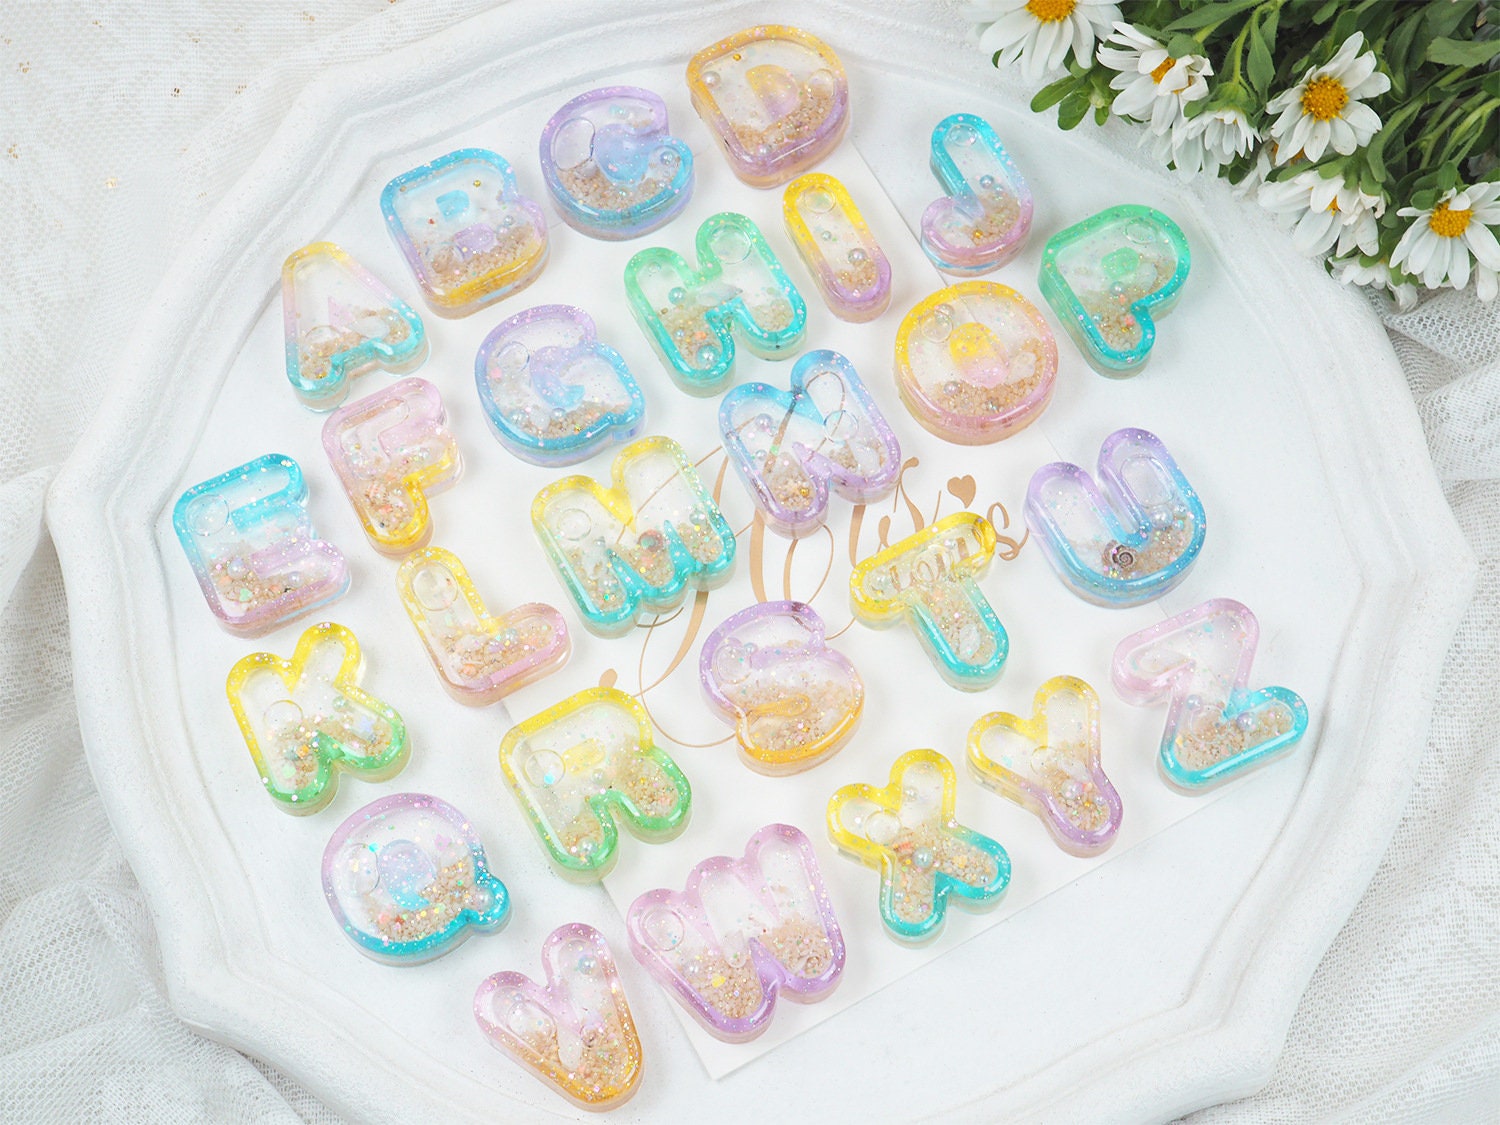 Lanhui Clearly Molds Silicone Molds for Resin Small Reverse Letters &  Numbers Set Uppercase & Lowercase Epoxy Resin Casting 